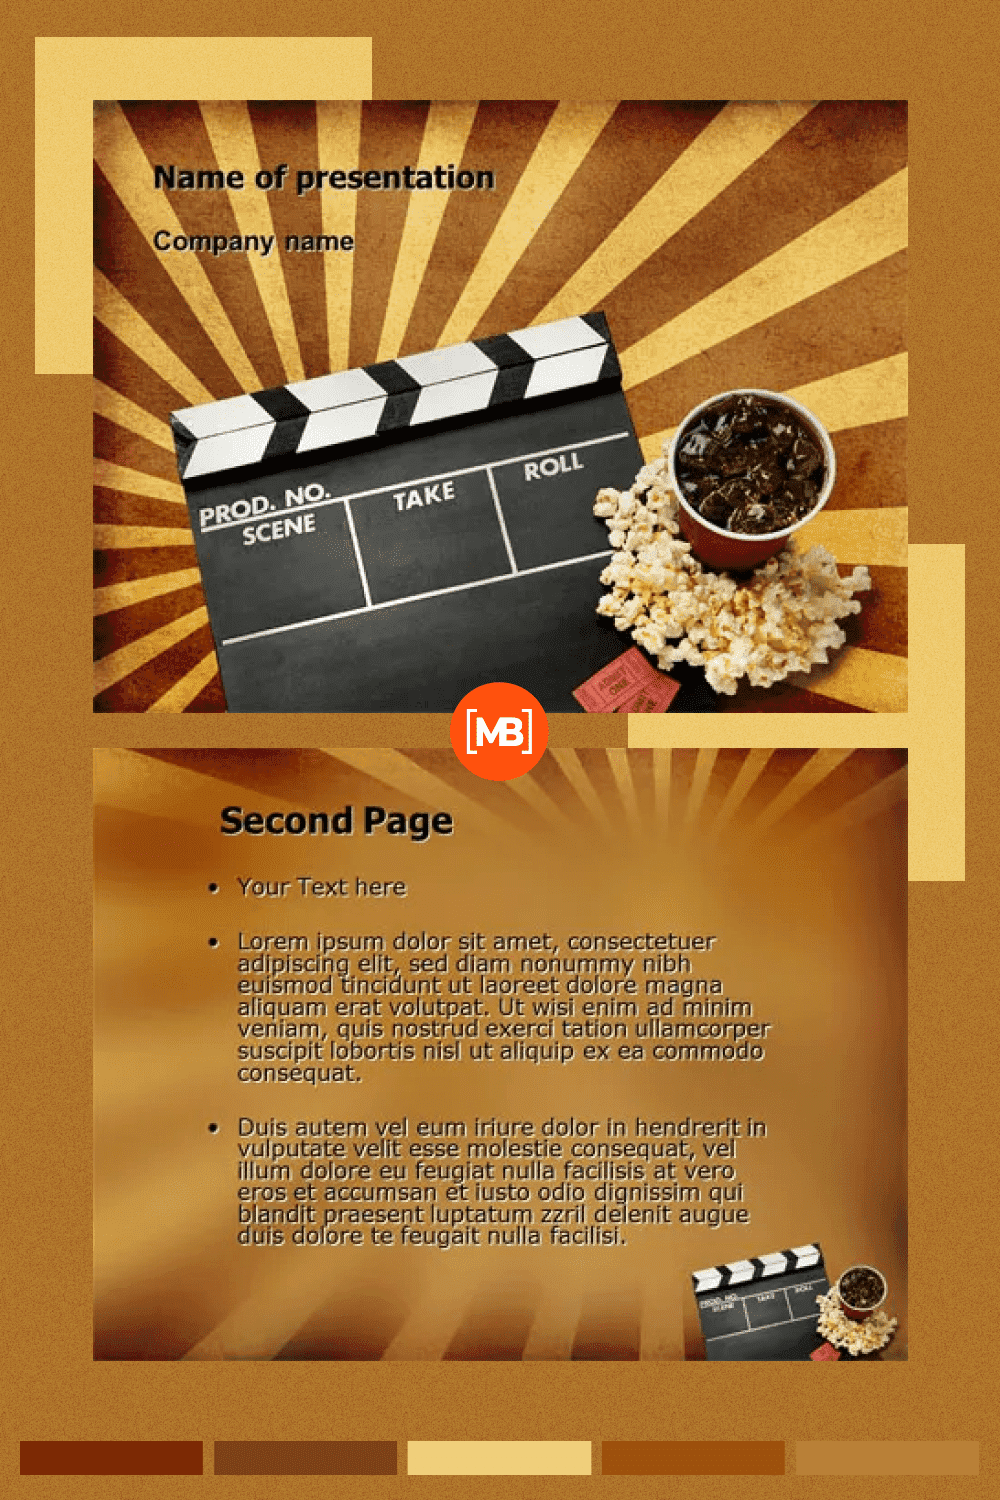 Films and cinema - powerpoint template.